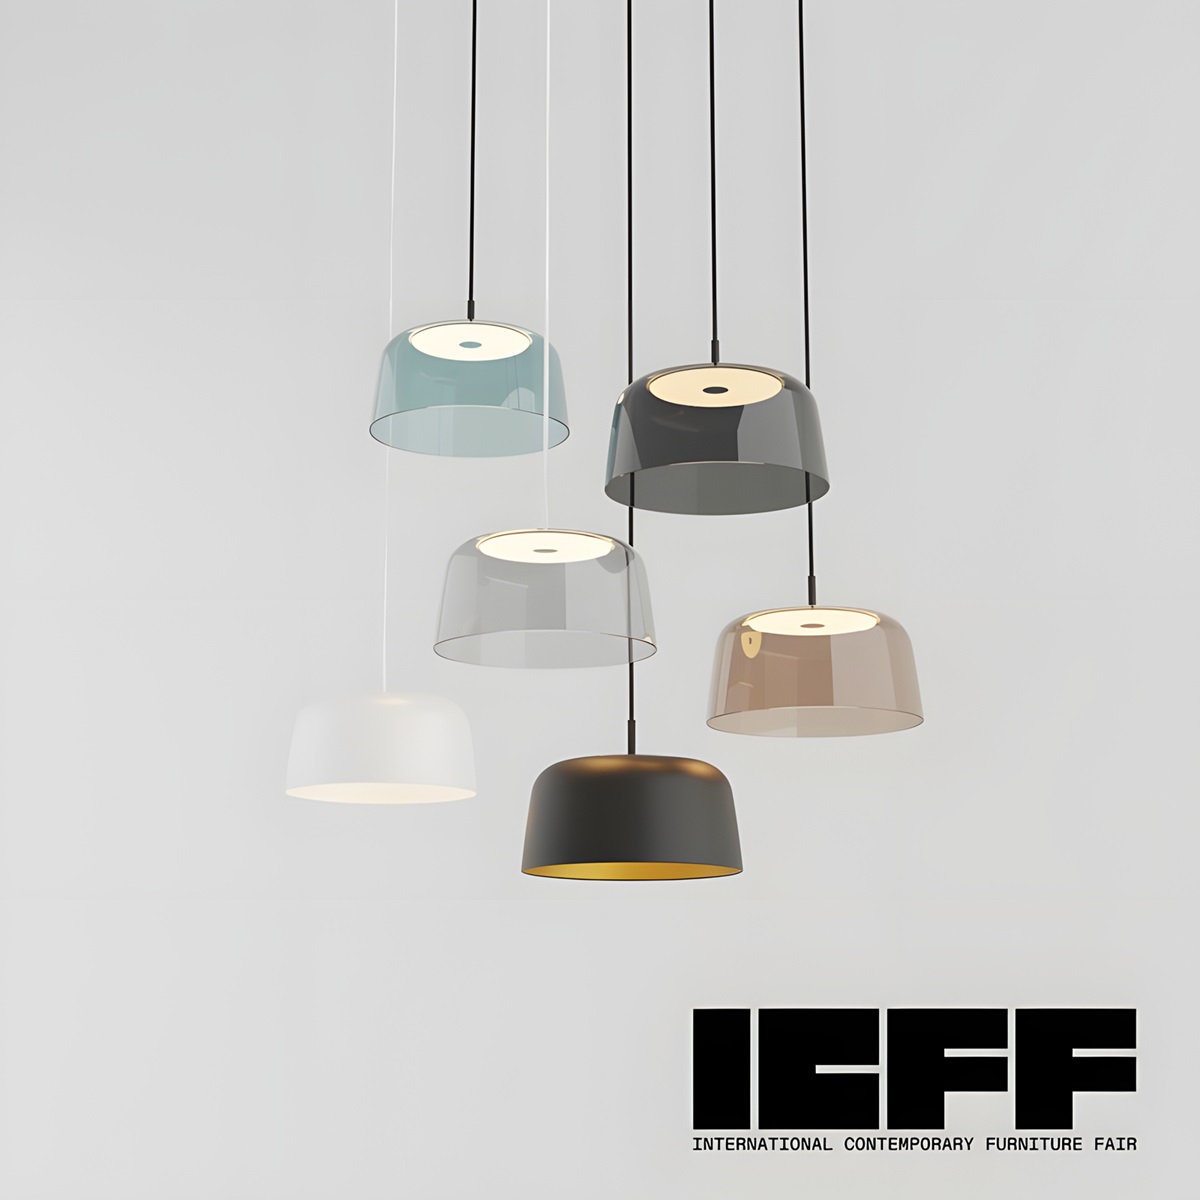 Join Koncept at ICFF in New York to Explore the Latest in Lighting Design